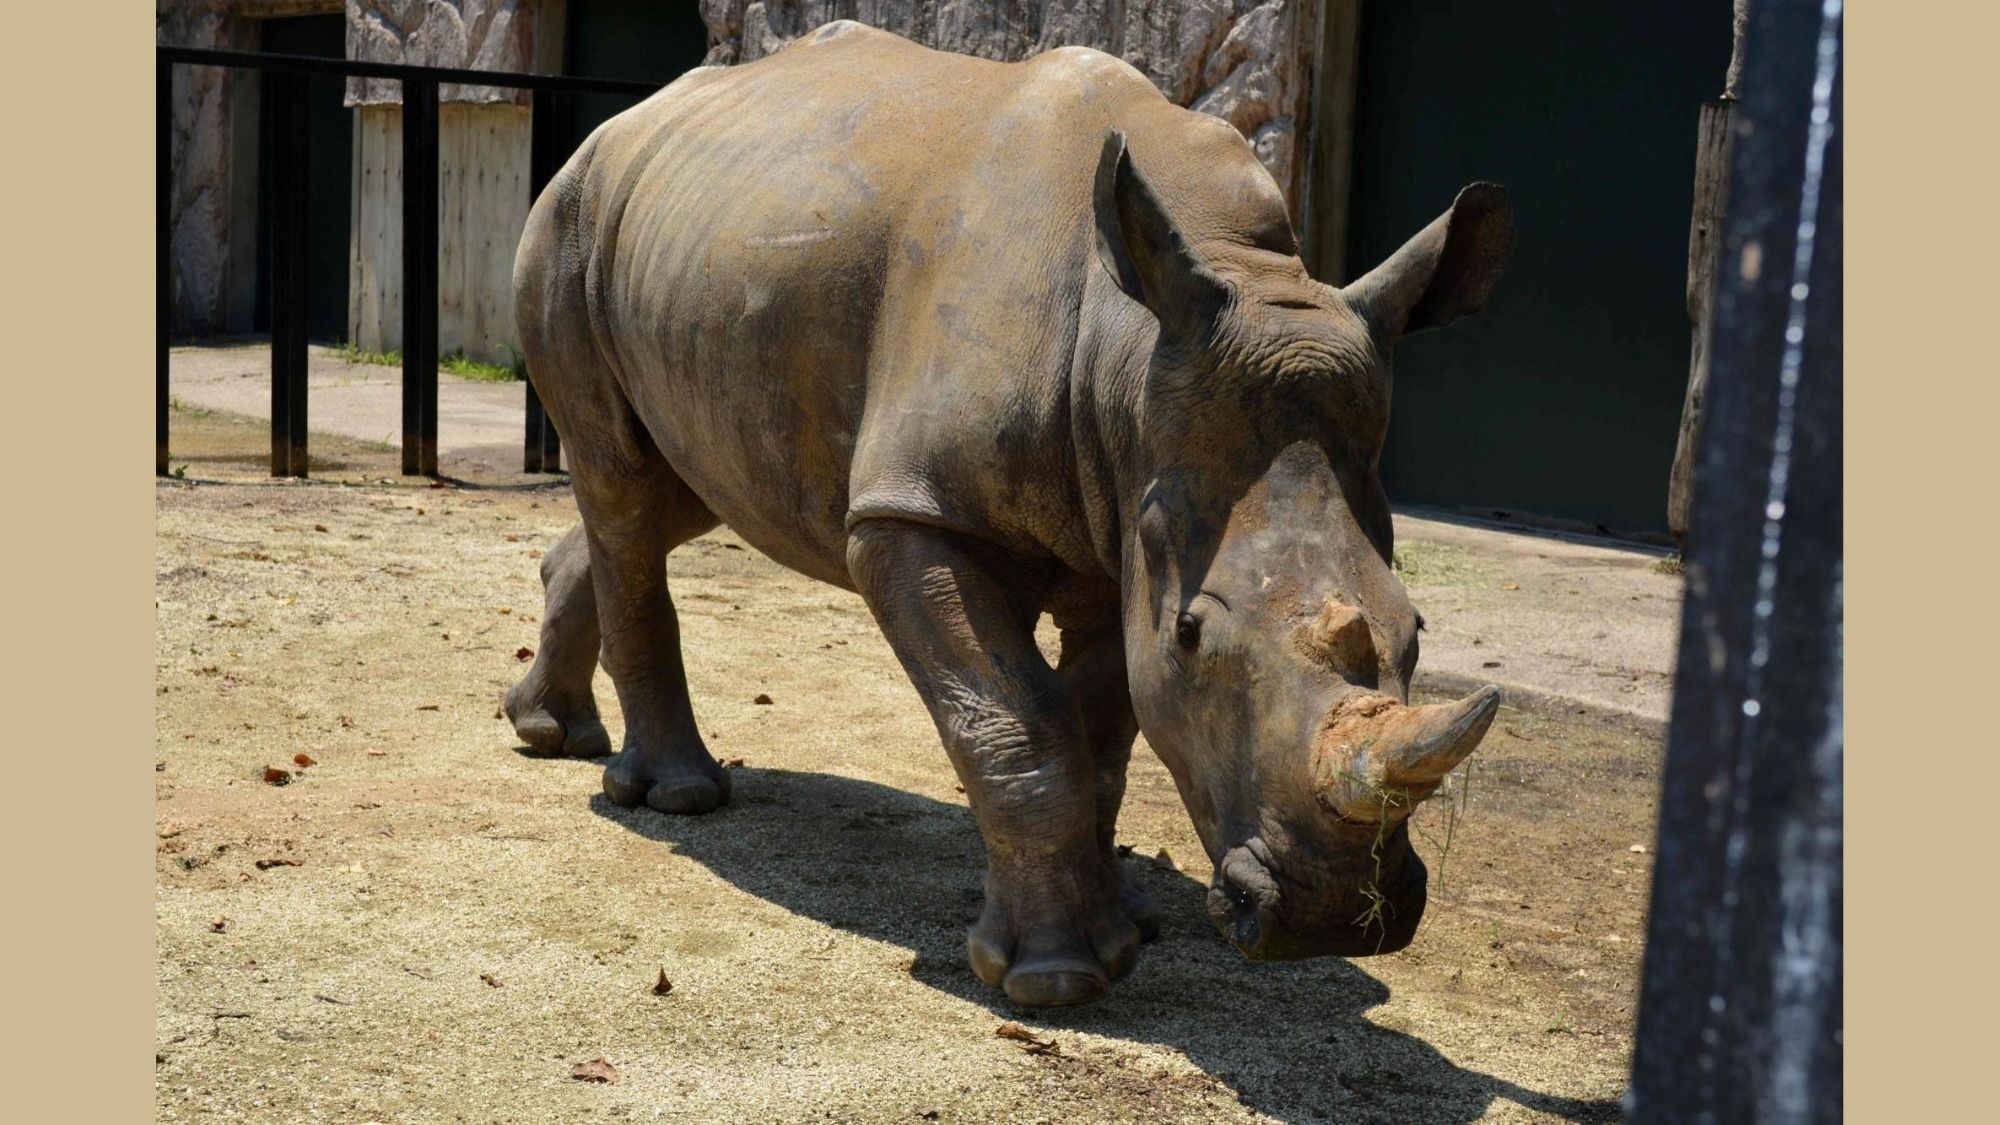 Looking for love, white rhino 'Emma' lands in Japan 